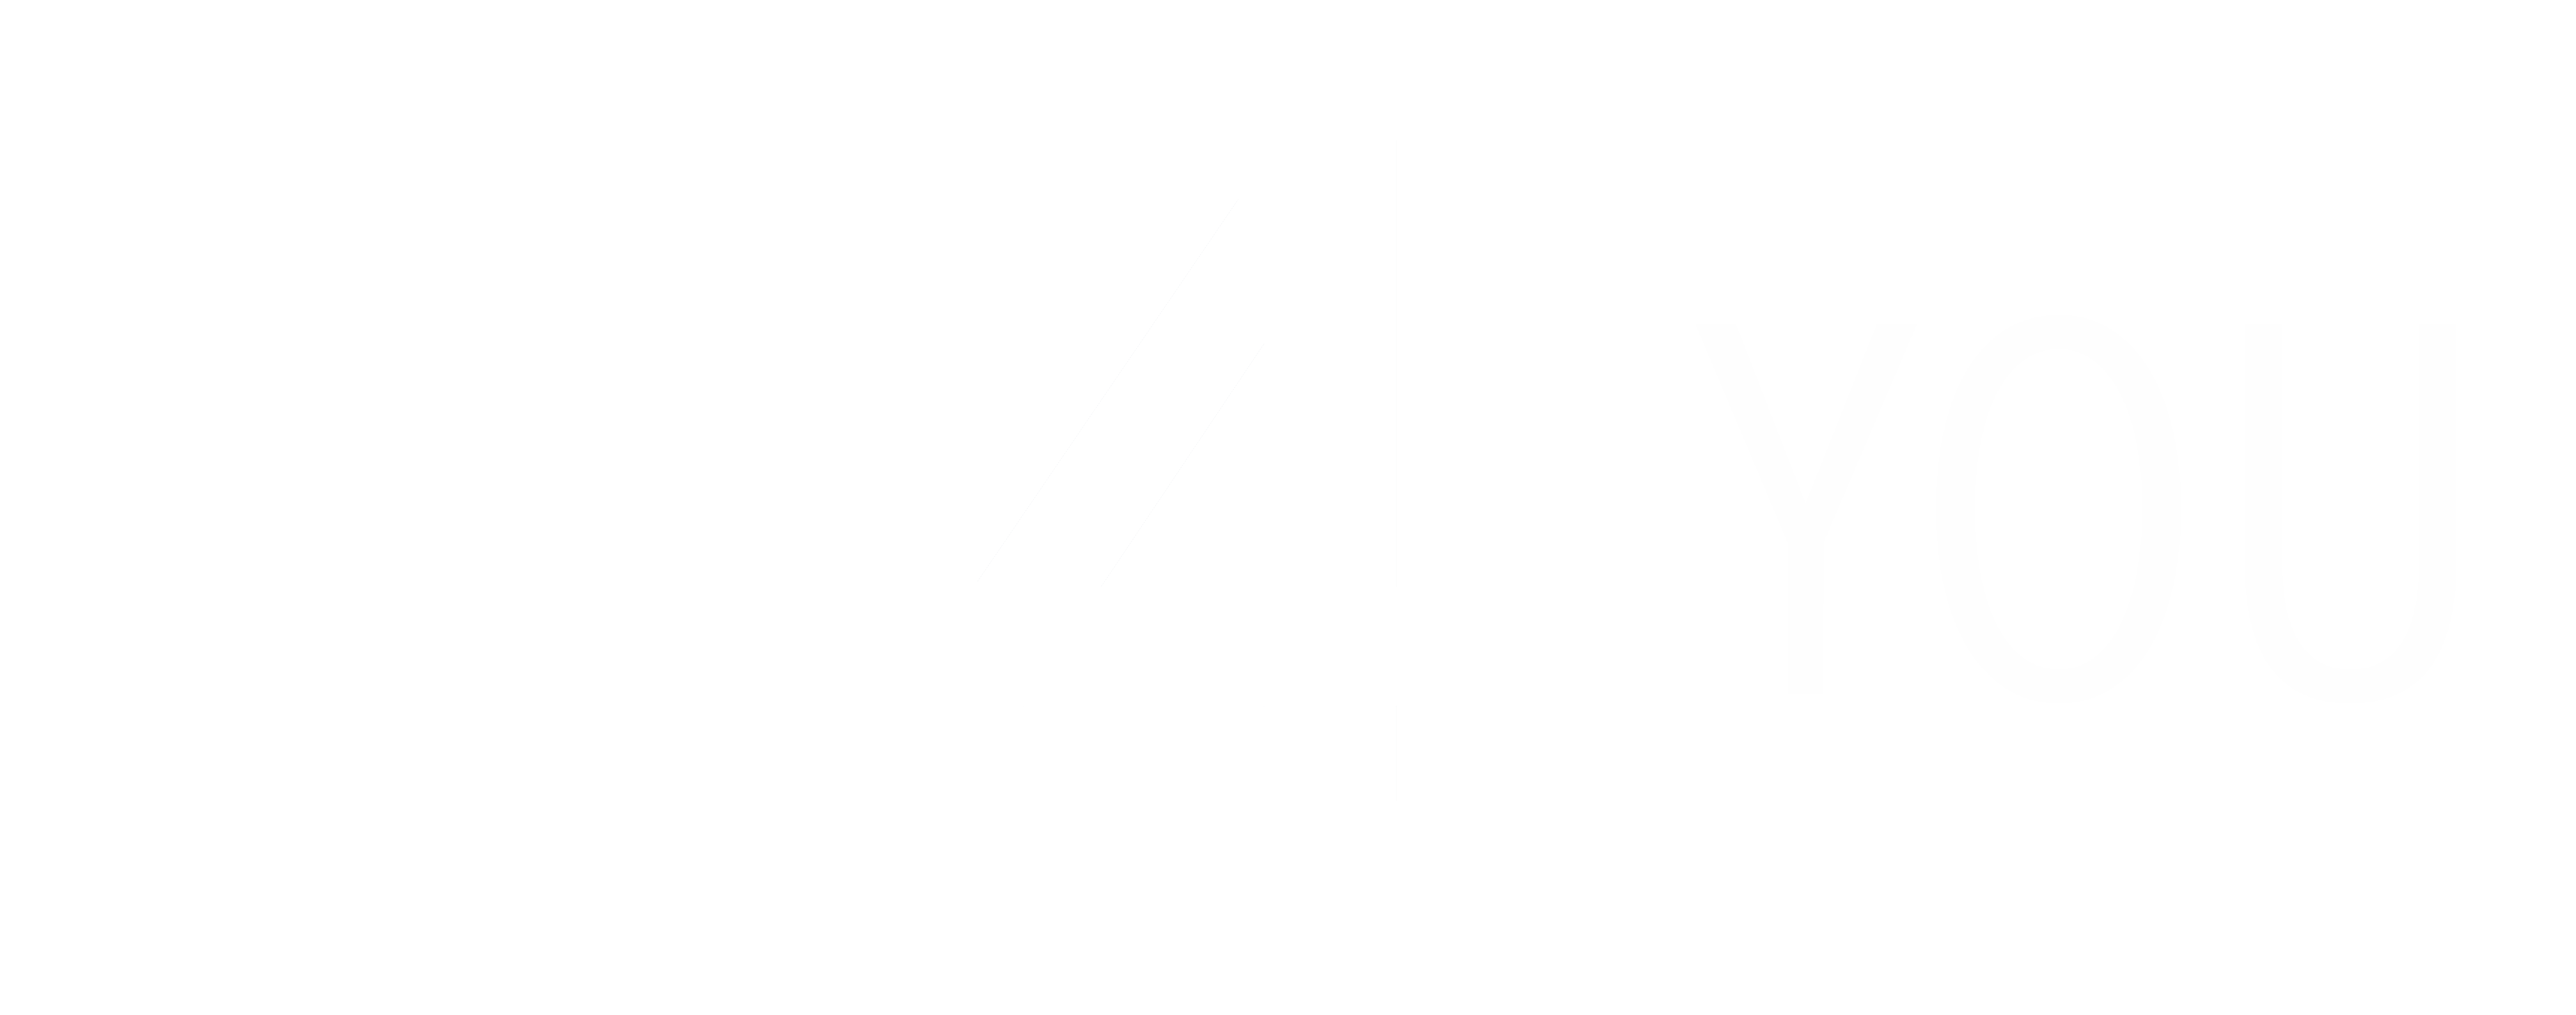 Job4You - We are your future.